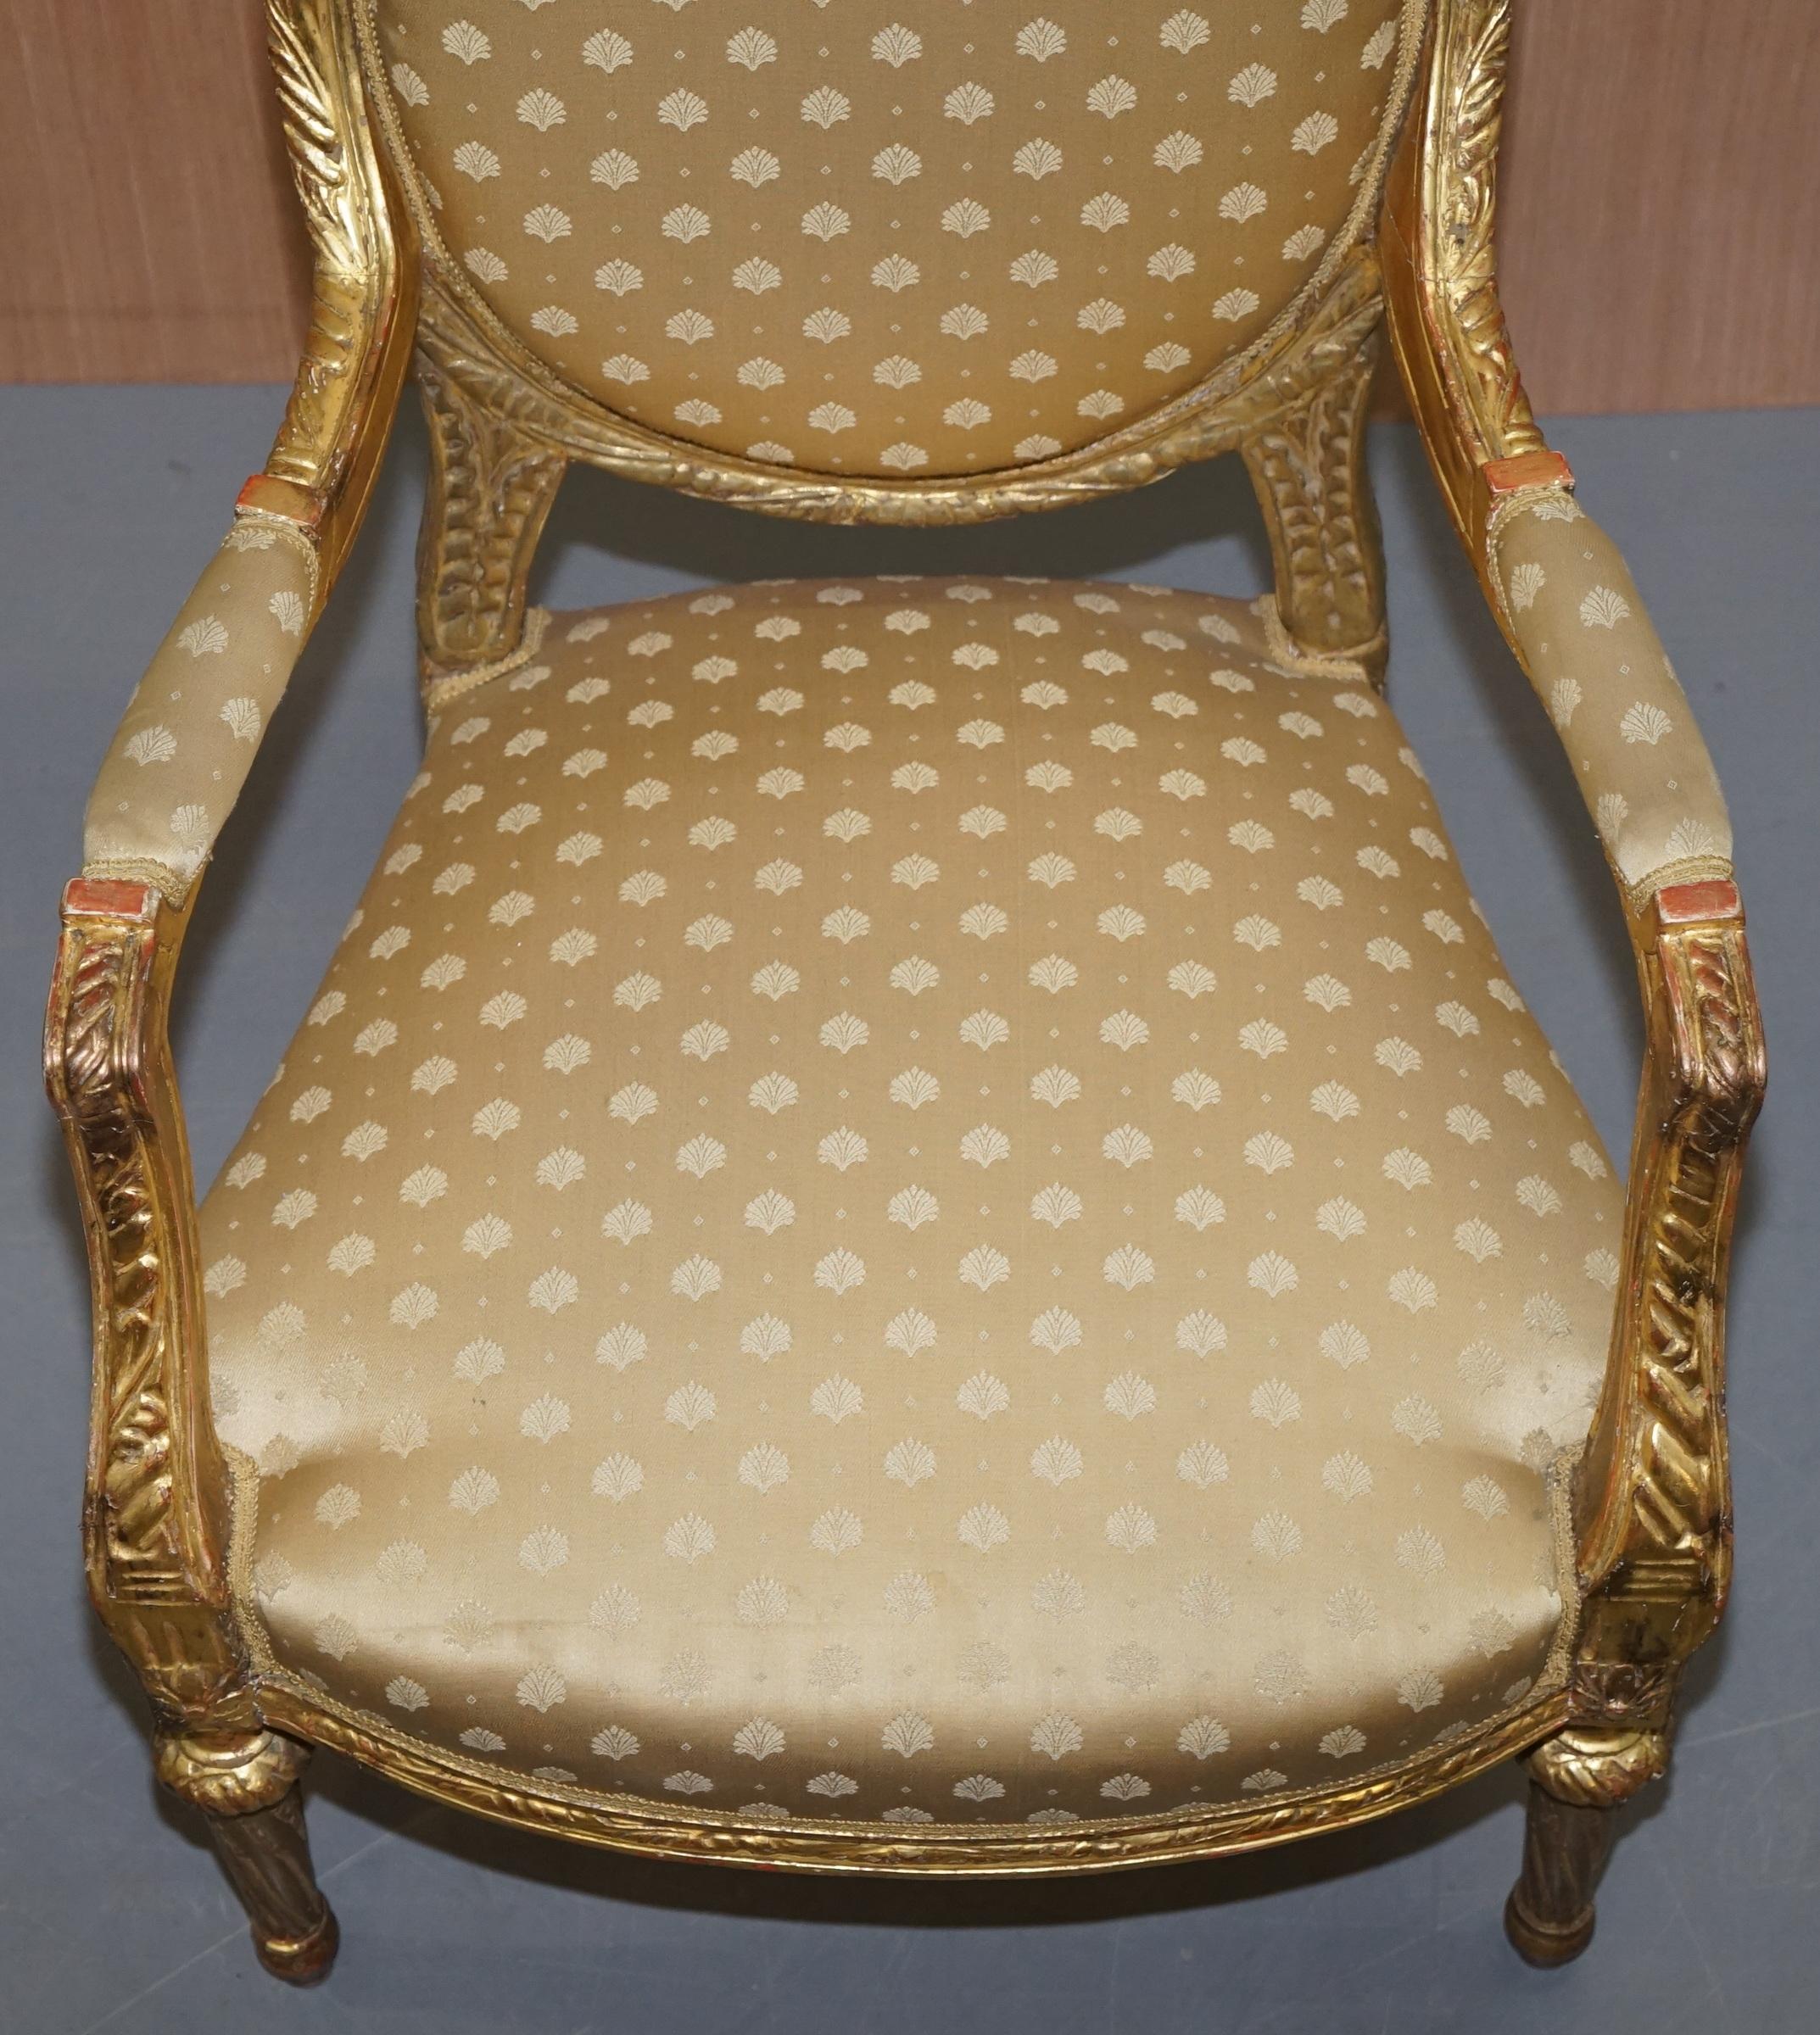 Hand-Crafted Rare French Giltwood Napoleon III circa 1870 Salon Throne Armchair Part of Suite